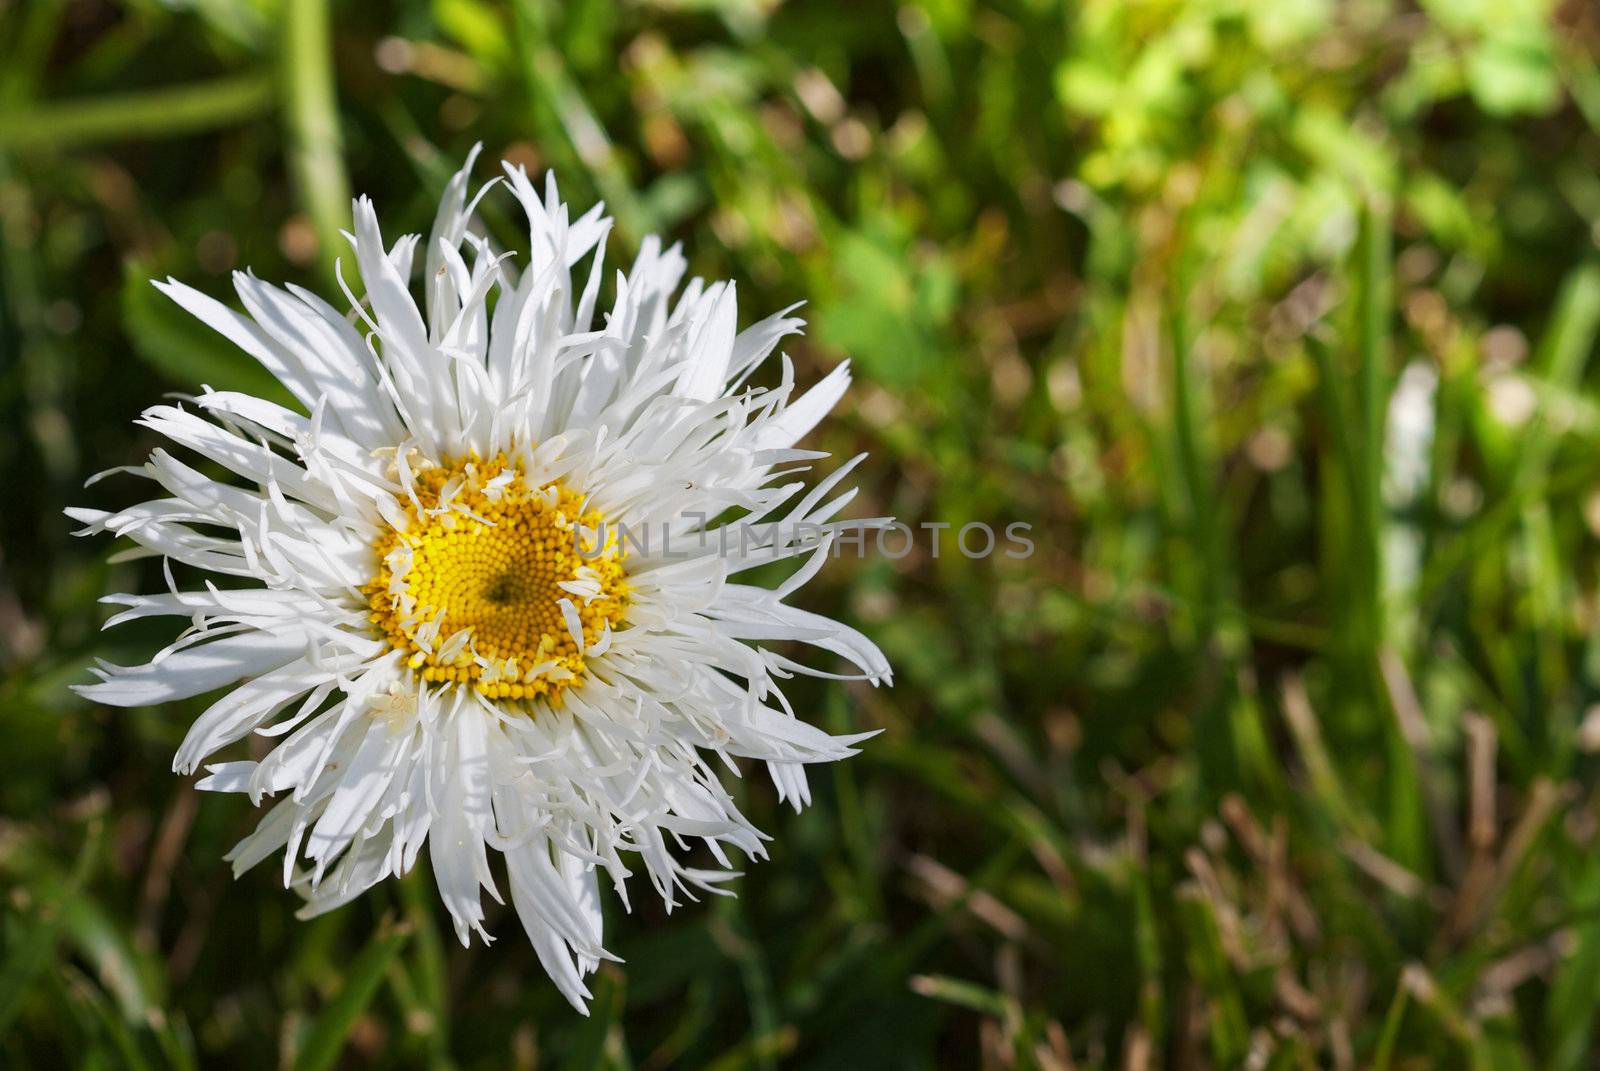 One Crazy Daisy with a soft focus grass background